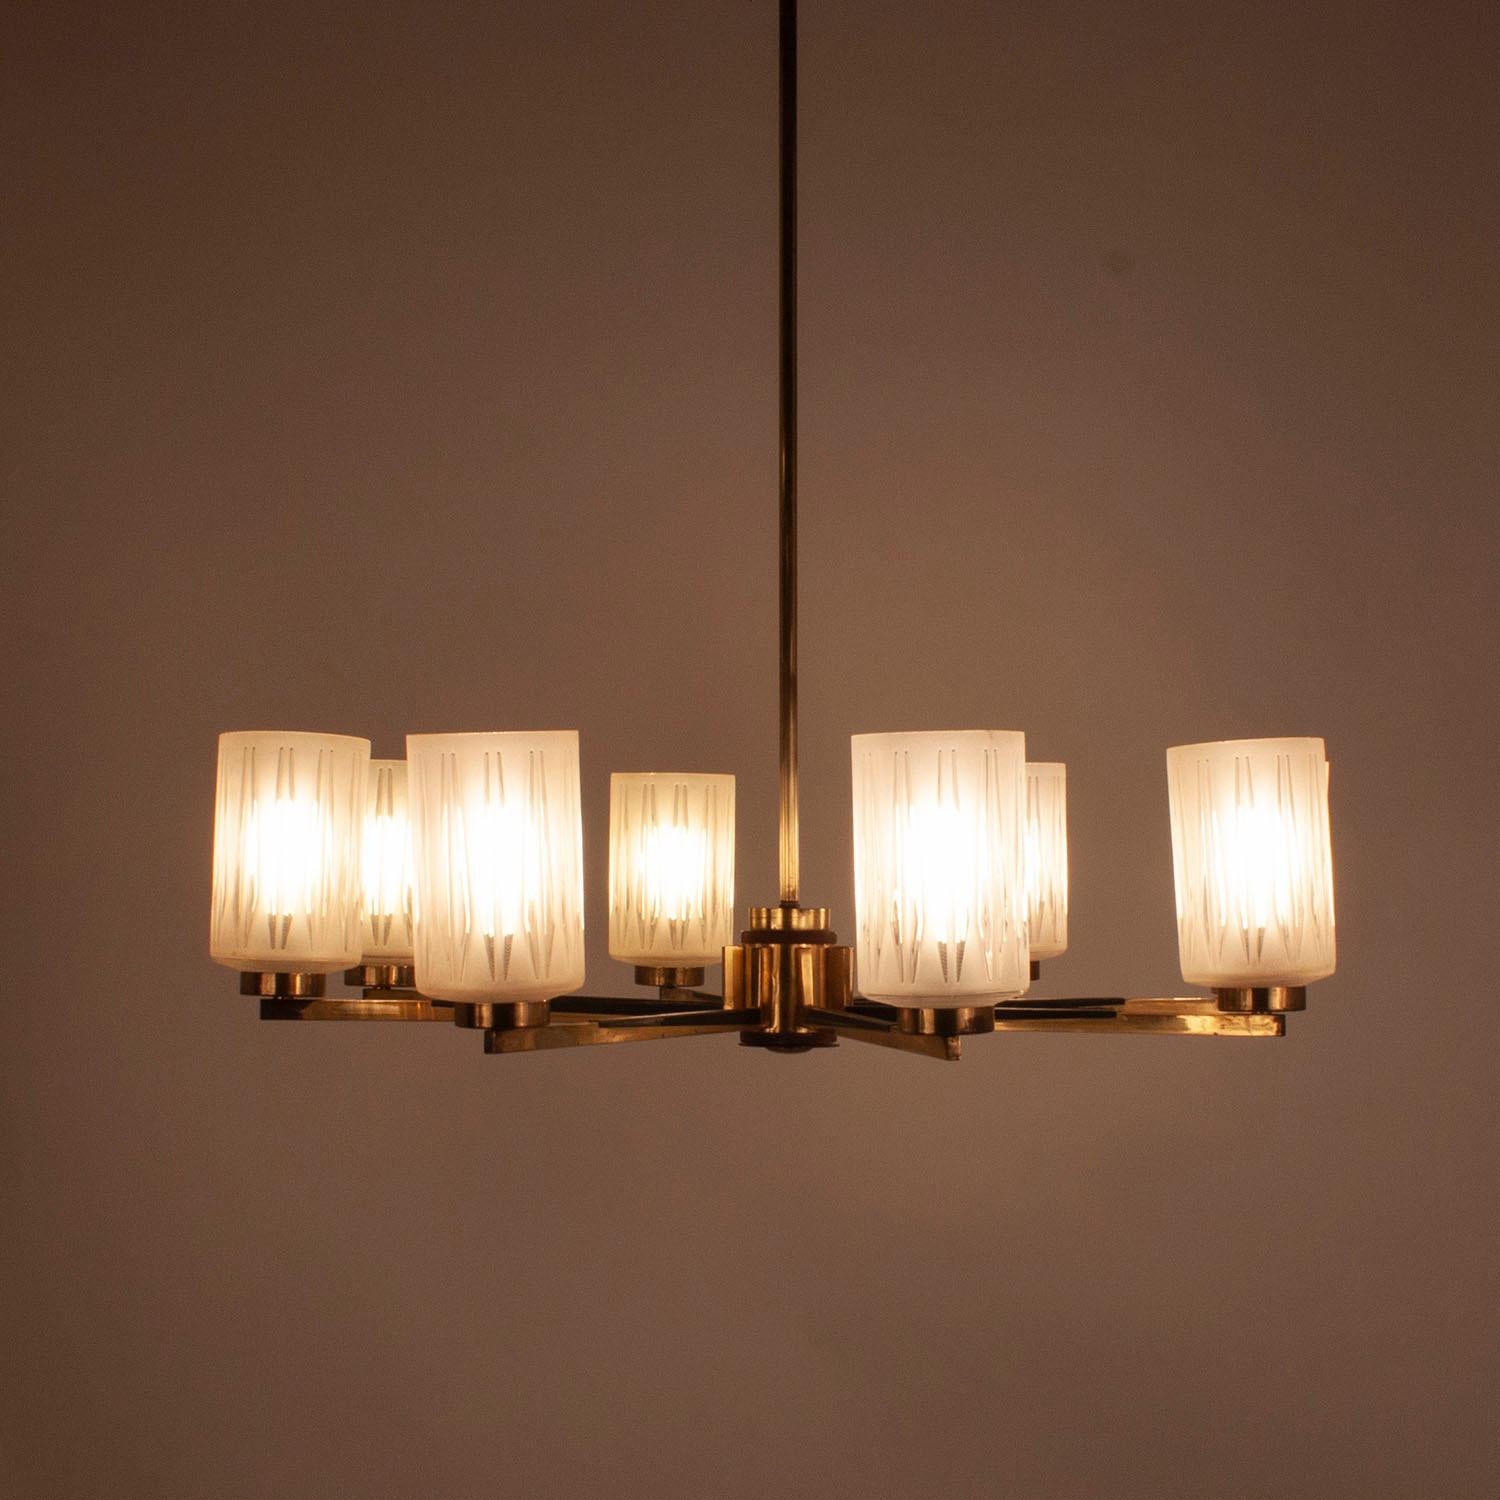 Mid-Century Modern Chandelier with 8 Lights, Polished Brass, Glass Lampshades, Germany, 1950s For Sale